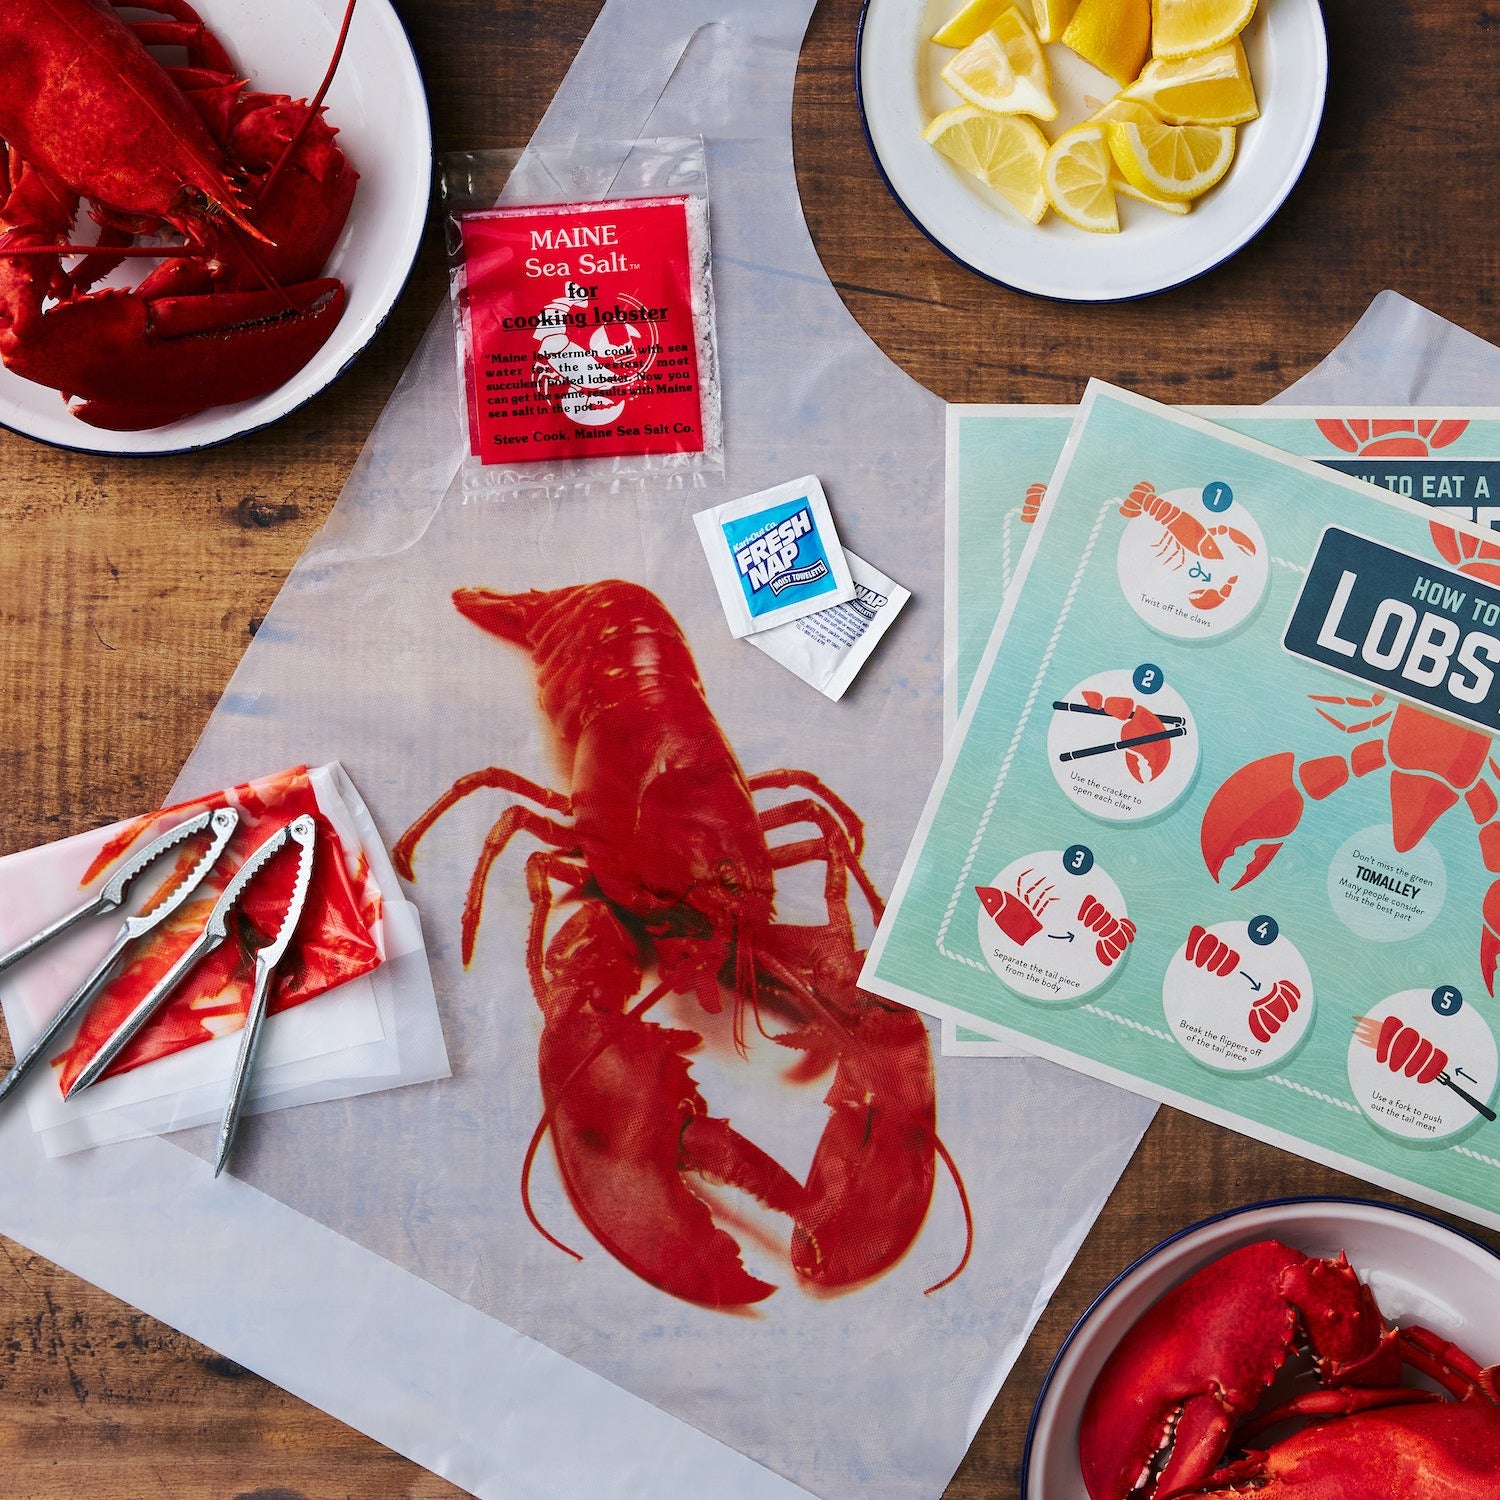 This photograph shows our Cousins Maine Lobster Toolkit laid out on a dining table beside some freshly steamed lobsters ready to be enjoyed!  The kit includes How-to-eat a Lobster Placemats, Two Lobster Claw Cracker, a pair of Lobster Bibs, a Packet of Maine Sea Salt (to season pot when cooking), and two Wet Naps for cleaning up!